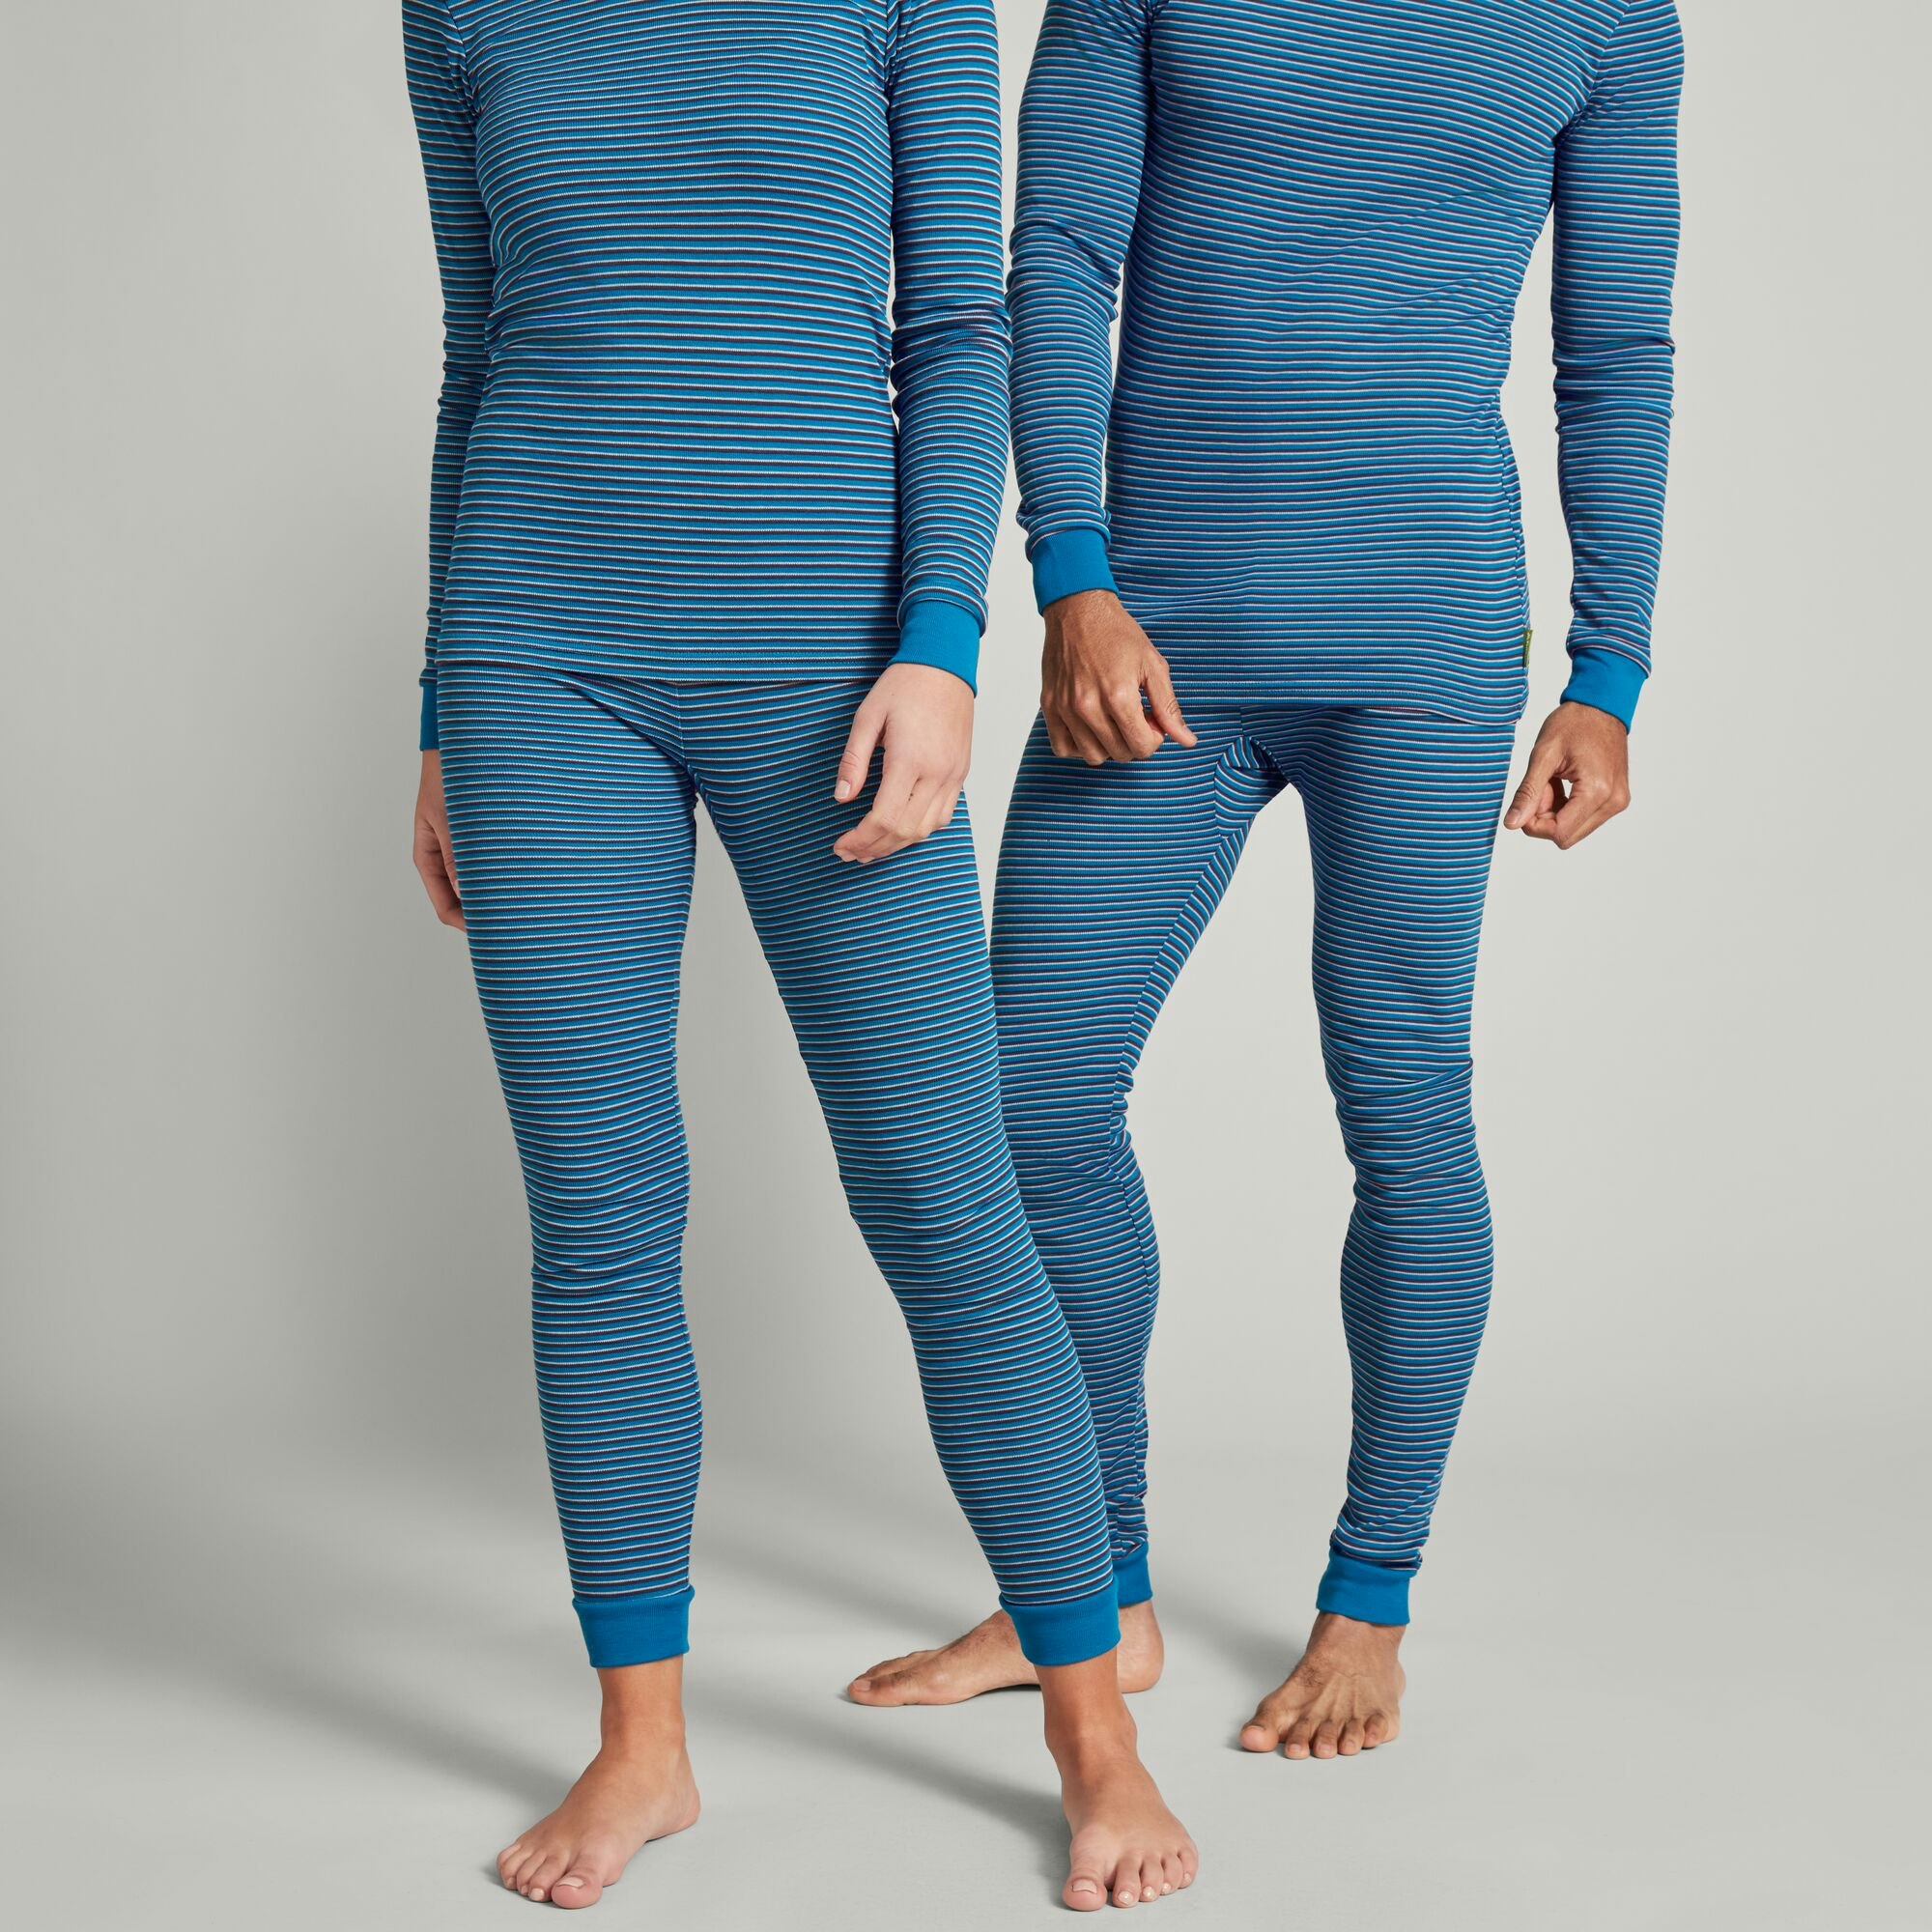 KMDCore Polypro Long Sleeve Thermal Base Layer Top v2 by Kathmandu Online, THE ICONIC